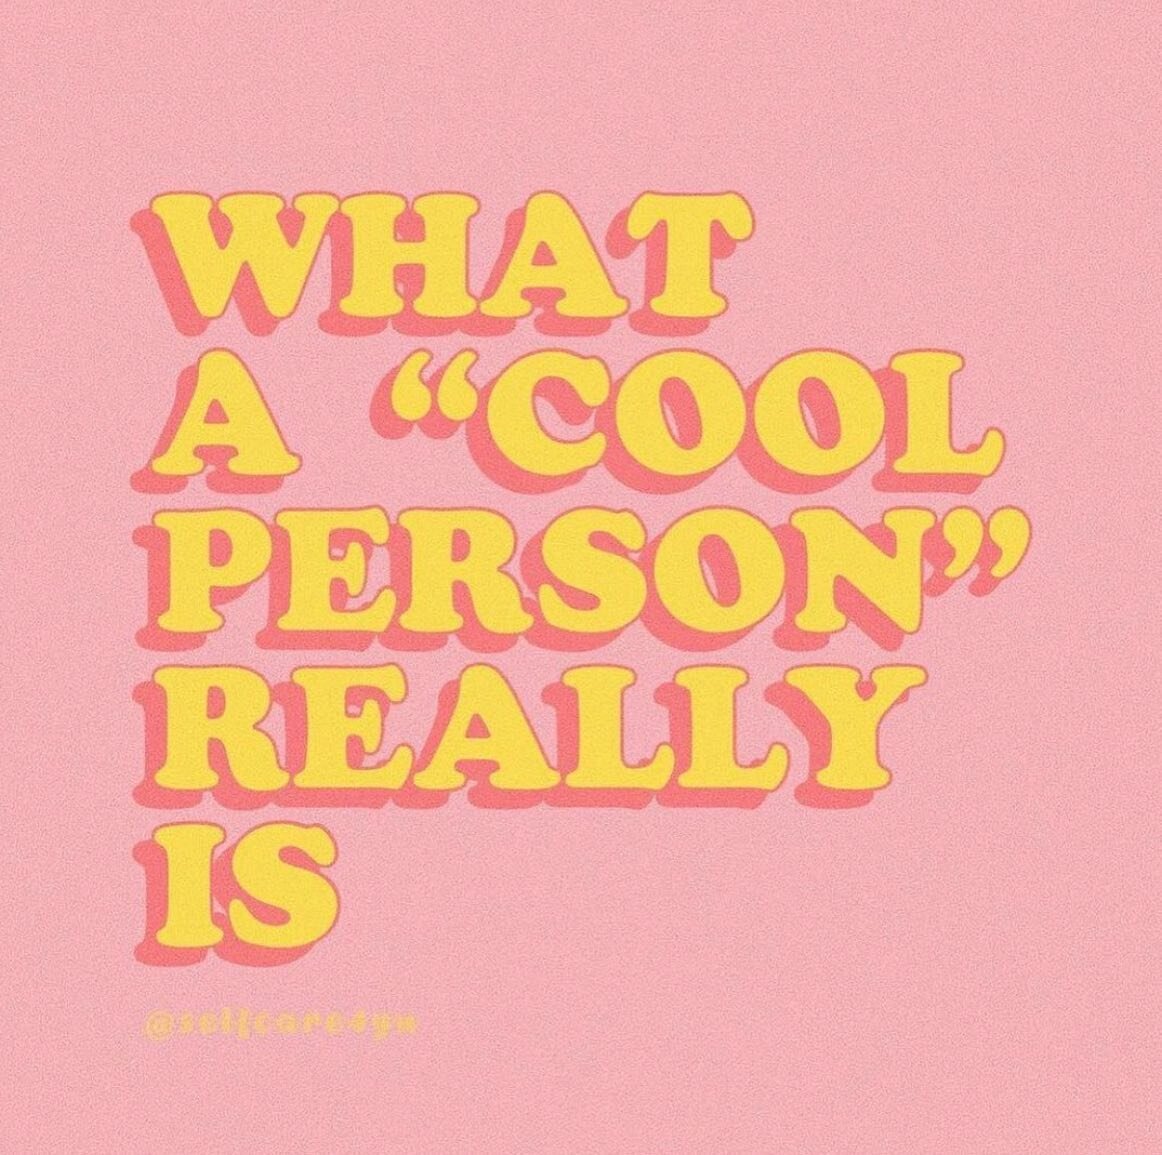 Be cool. 😎

#repostfrom @selfcare4yu 

#selfcarefirst #selfcarefam #healthyrelationships #mentalwellbeing #perspectiveiseverything